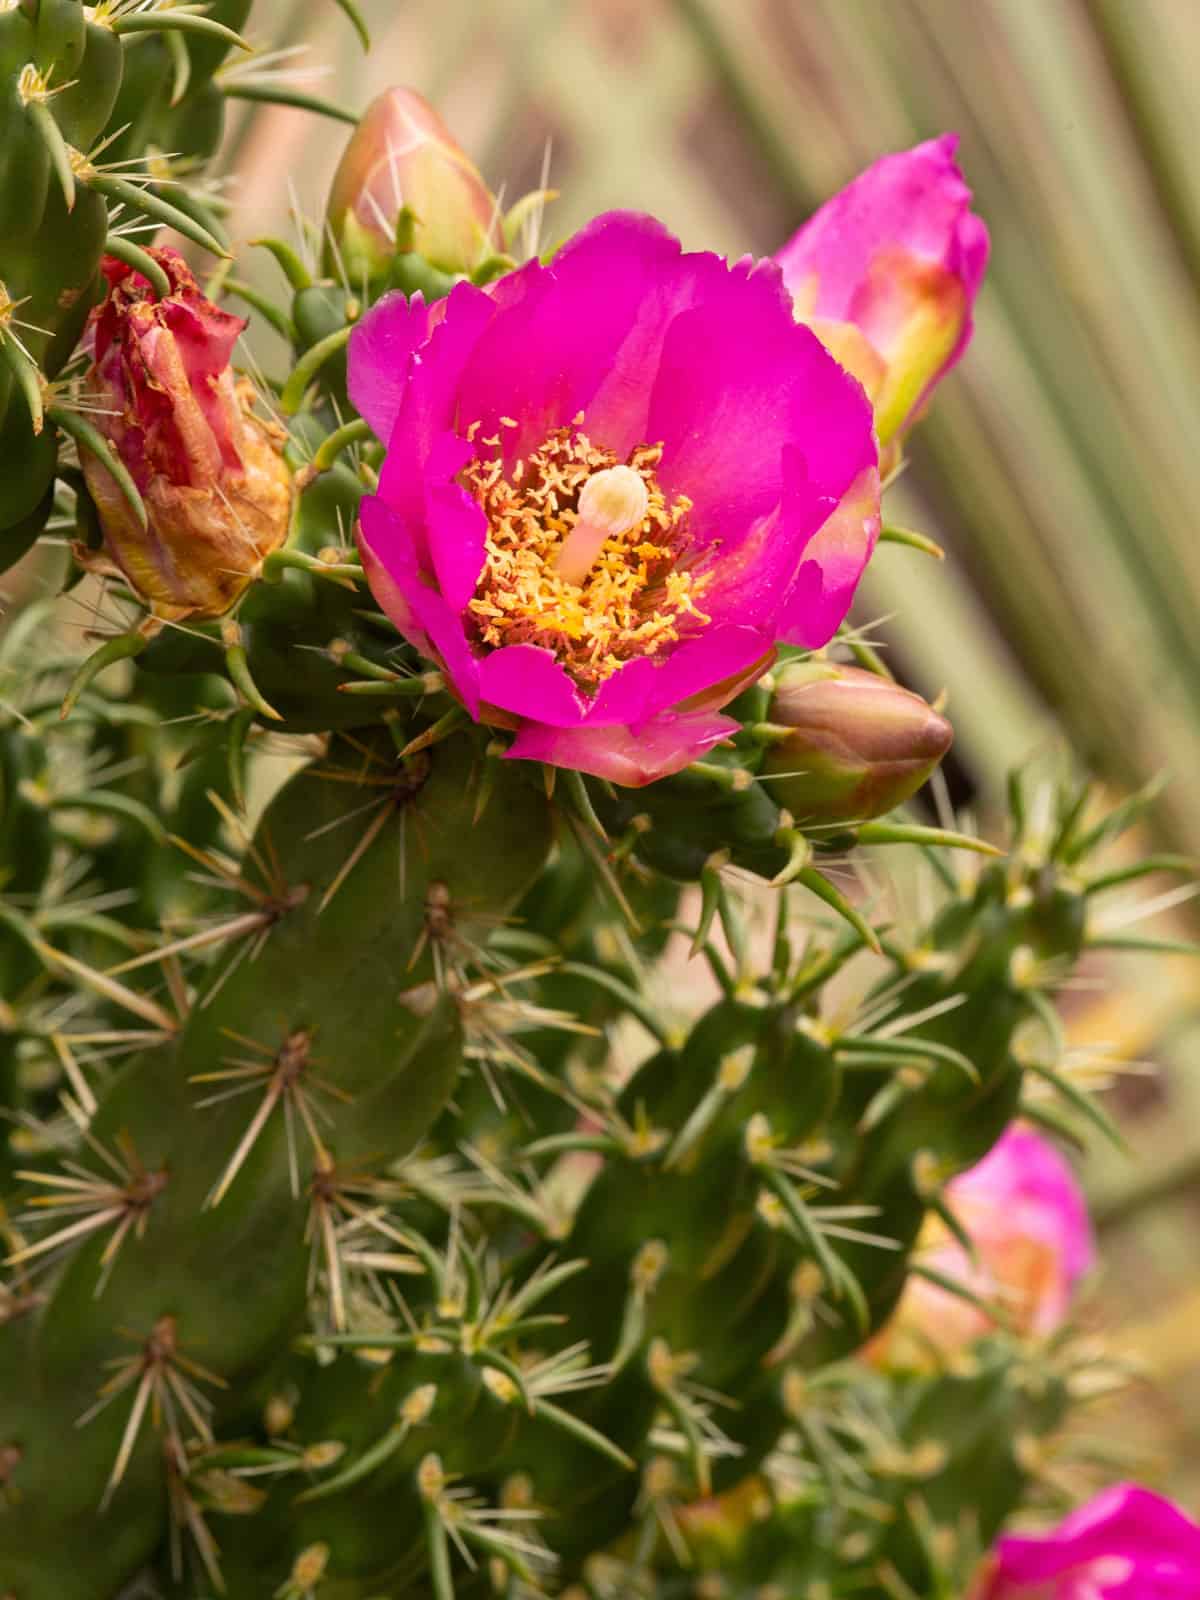 Blooming bright pink flower of a Walking stick Cholla